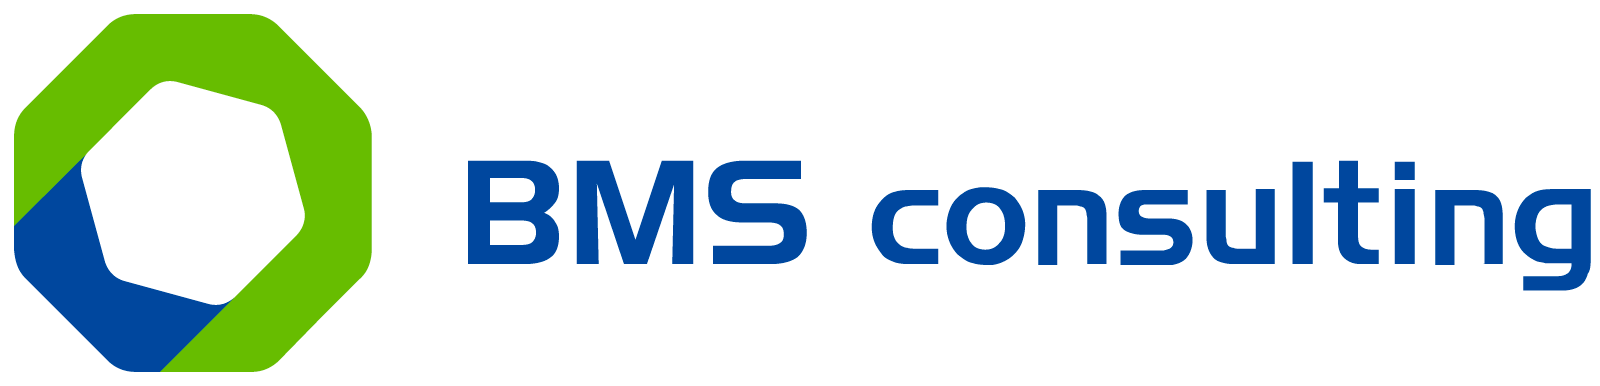 BMS consulting